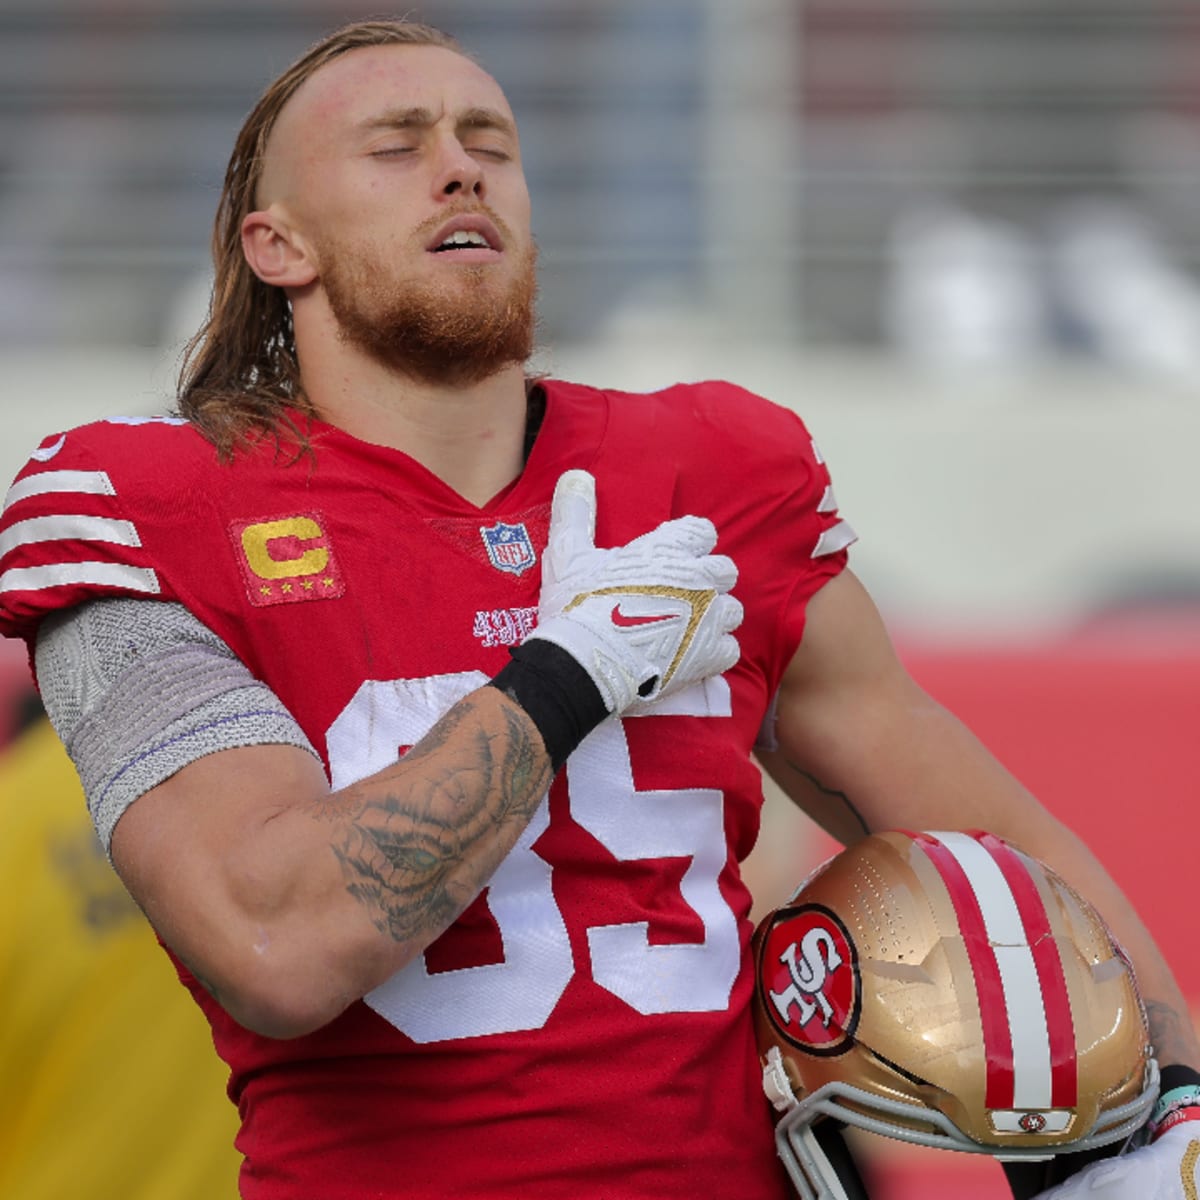 George Kittle Sizes Up 49ers Quarterback Brock Purdy - Sports